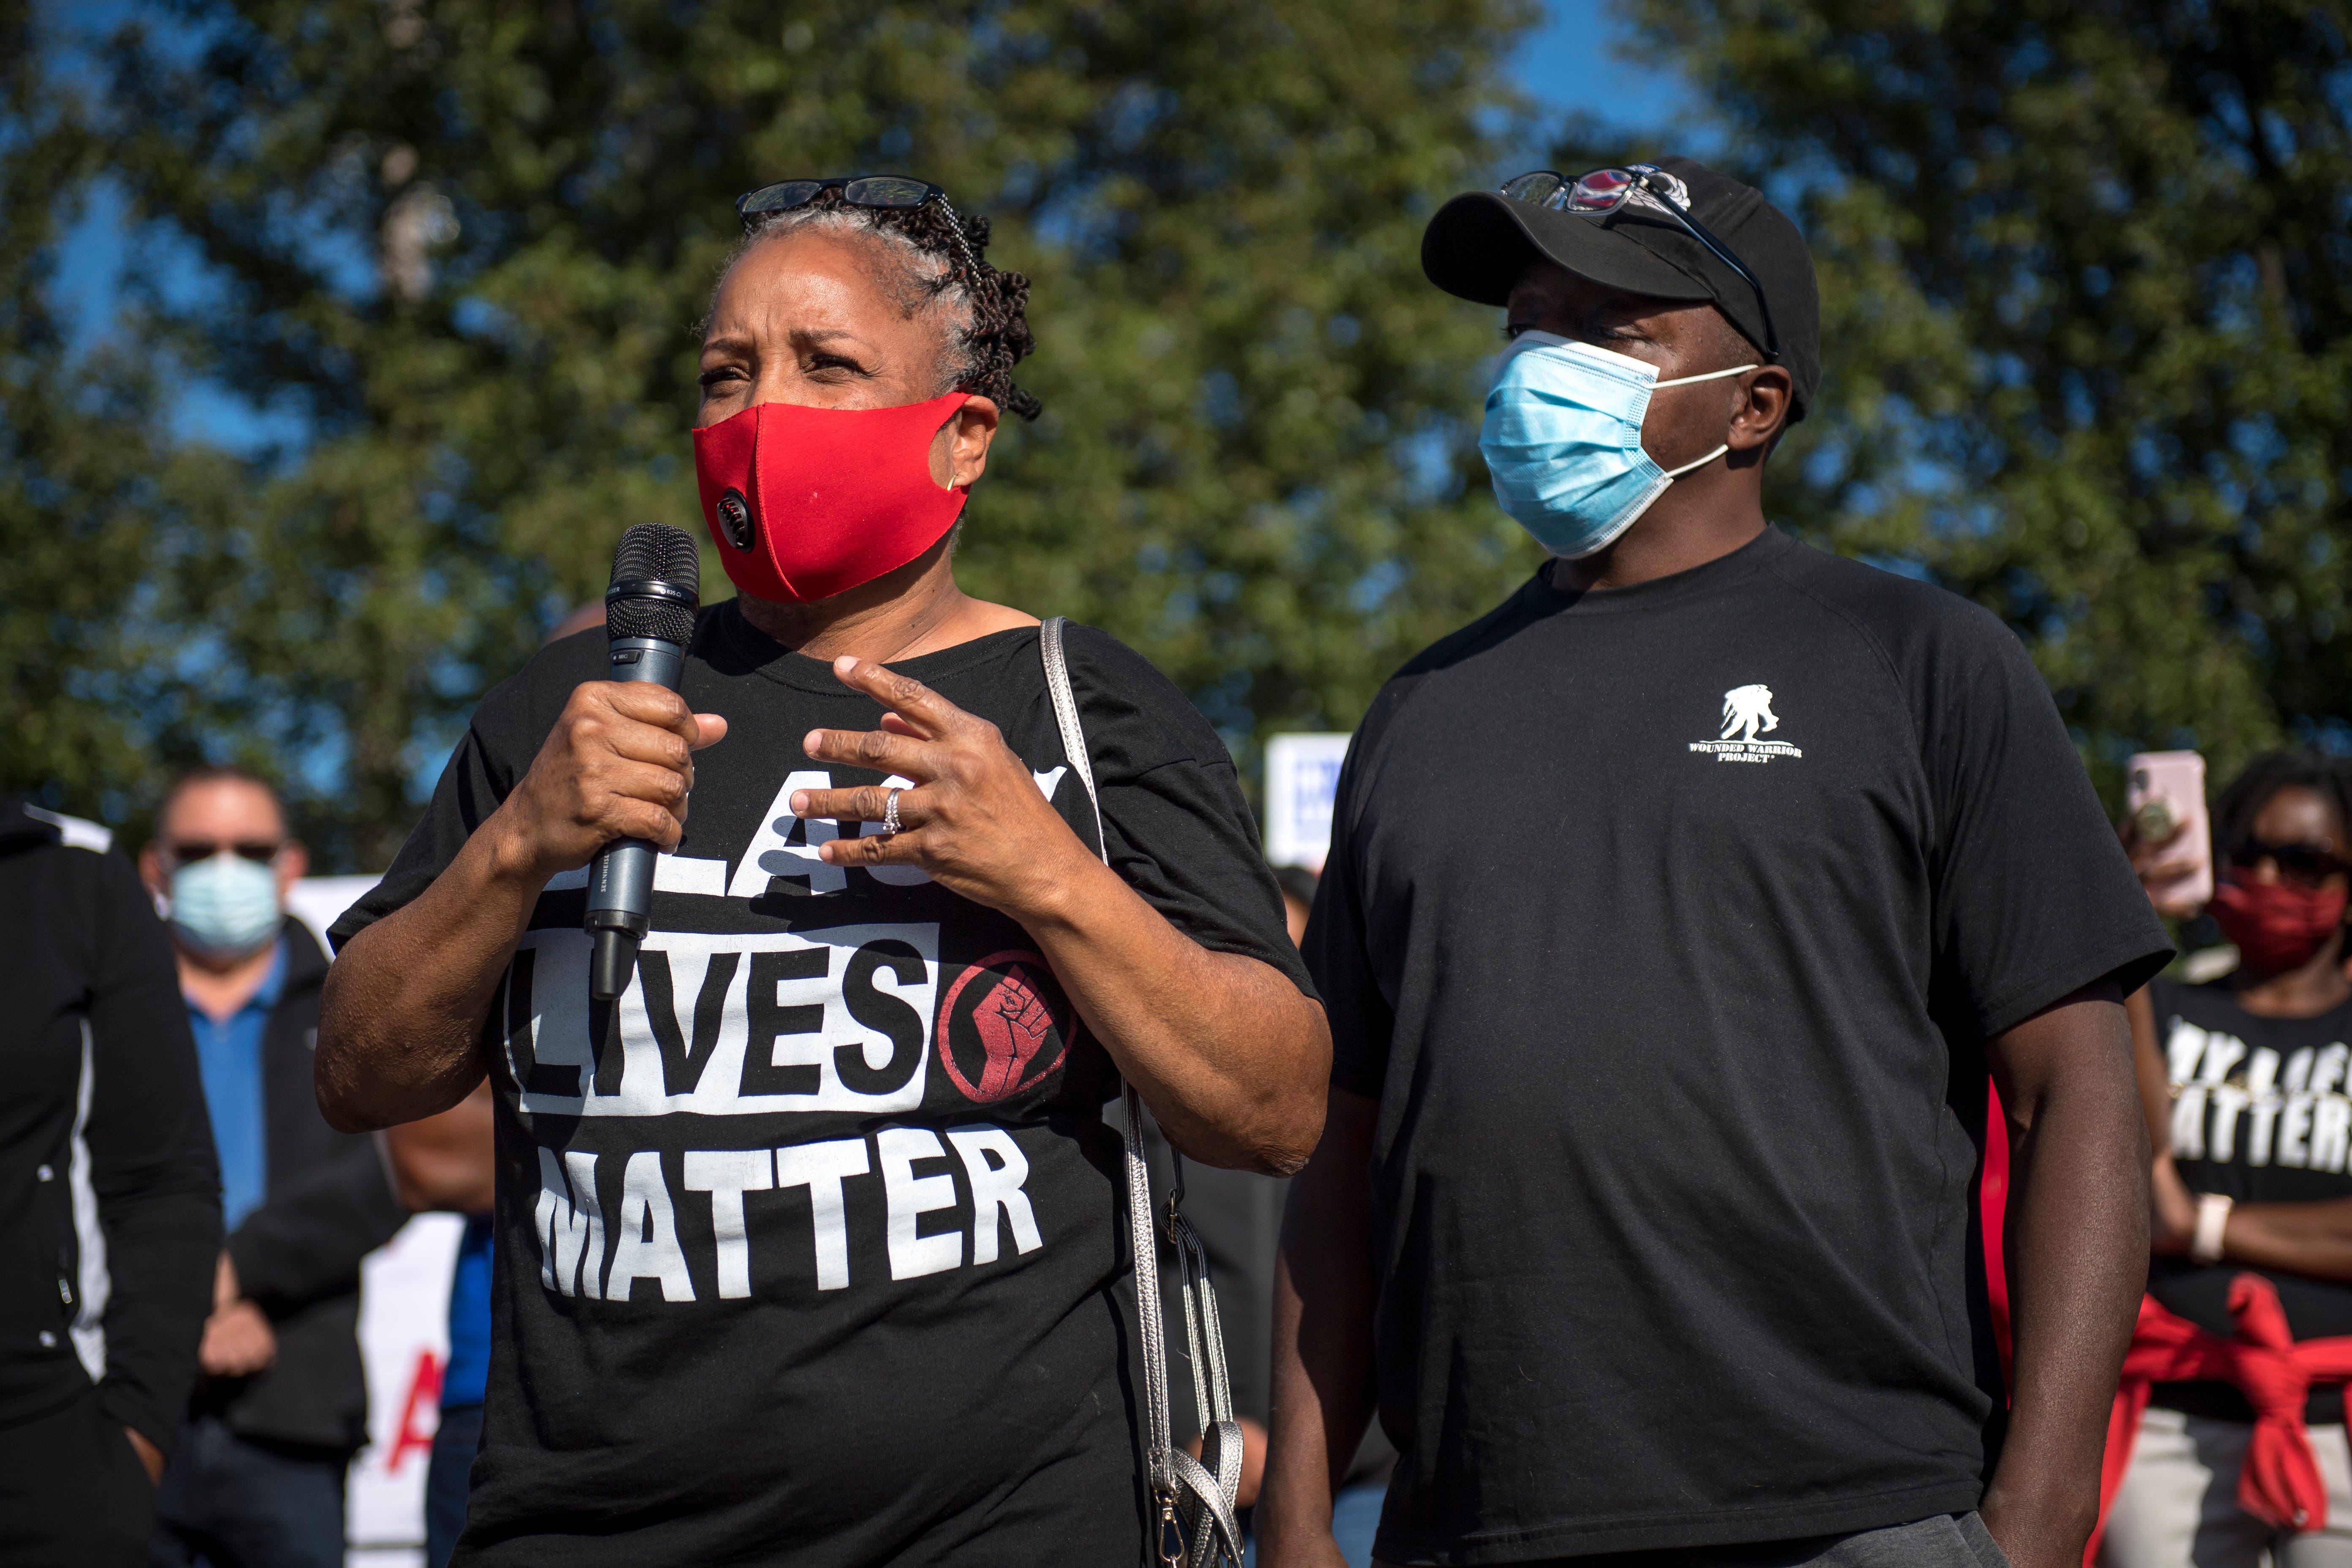 Candace Hall speaks before the March Against Racism in Warren on Sept. 19, 2020. The march in Warren occurred in response to the city called hate crimes against residents Candace Hall, her husband Eddie and their two children.